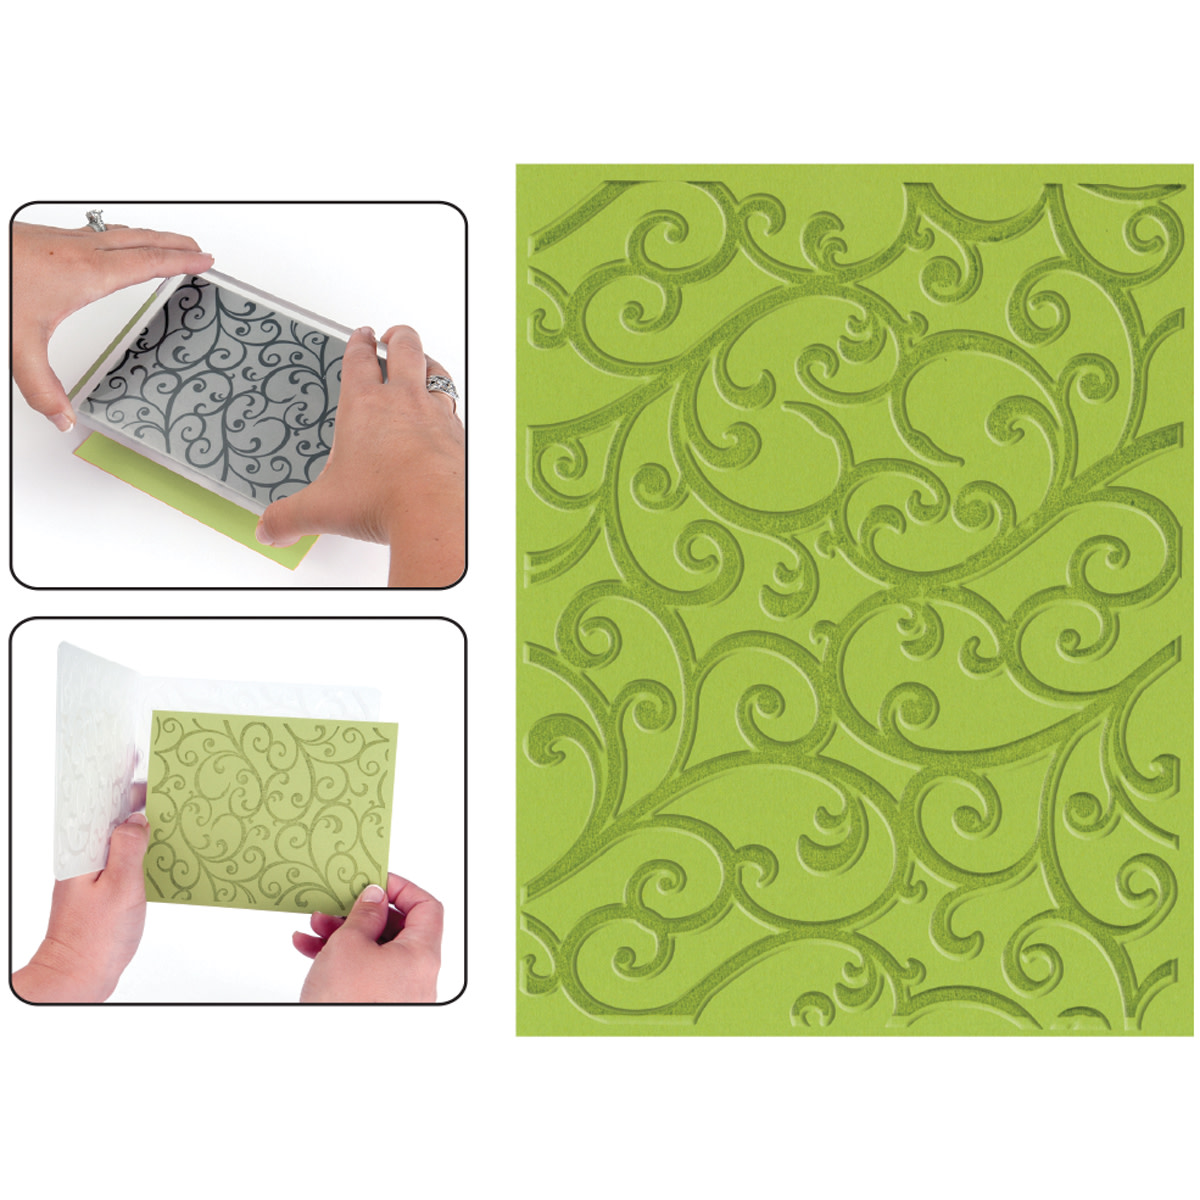 embossing-tips-and-ideas